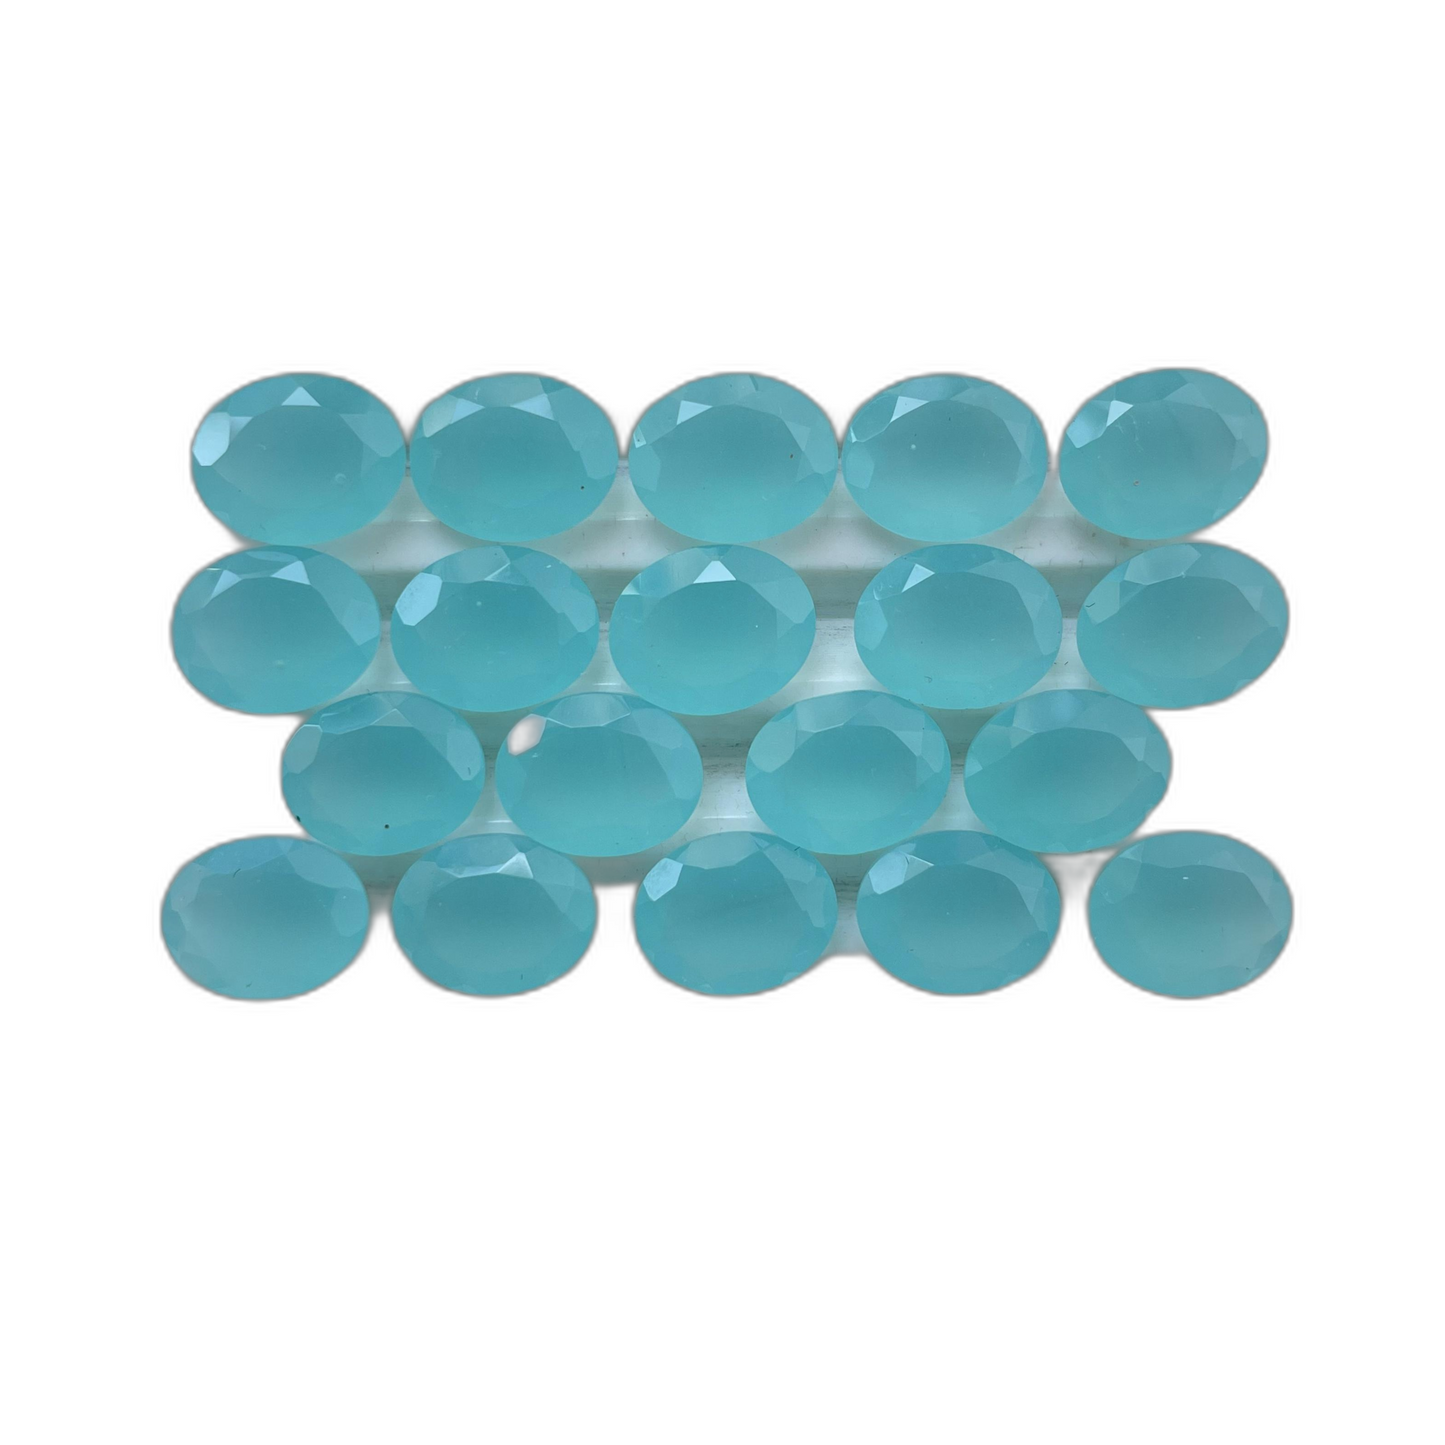 Chalcedony Faceted Nice Quality (8-10 mm) Oval Shape